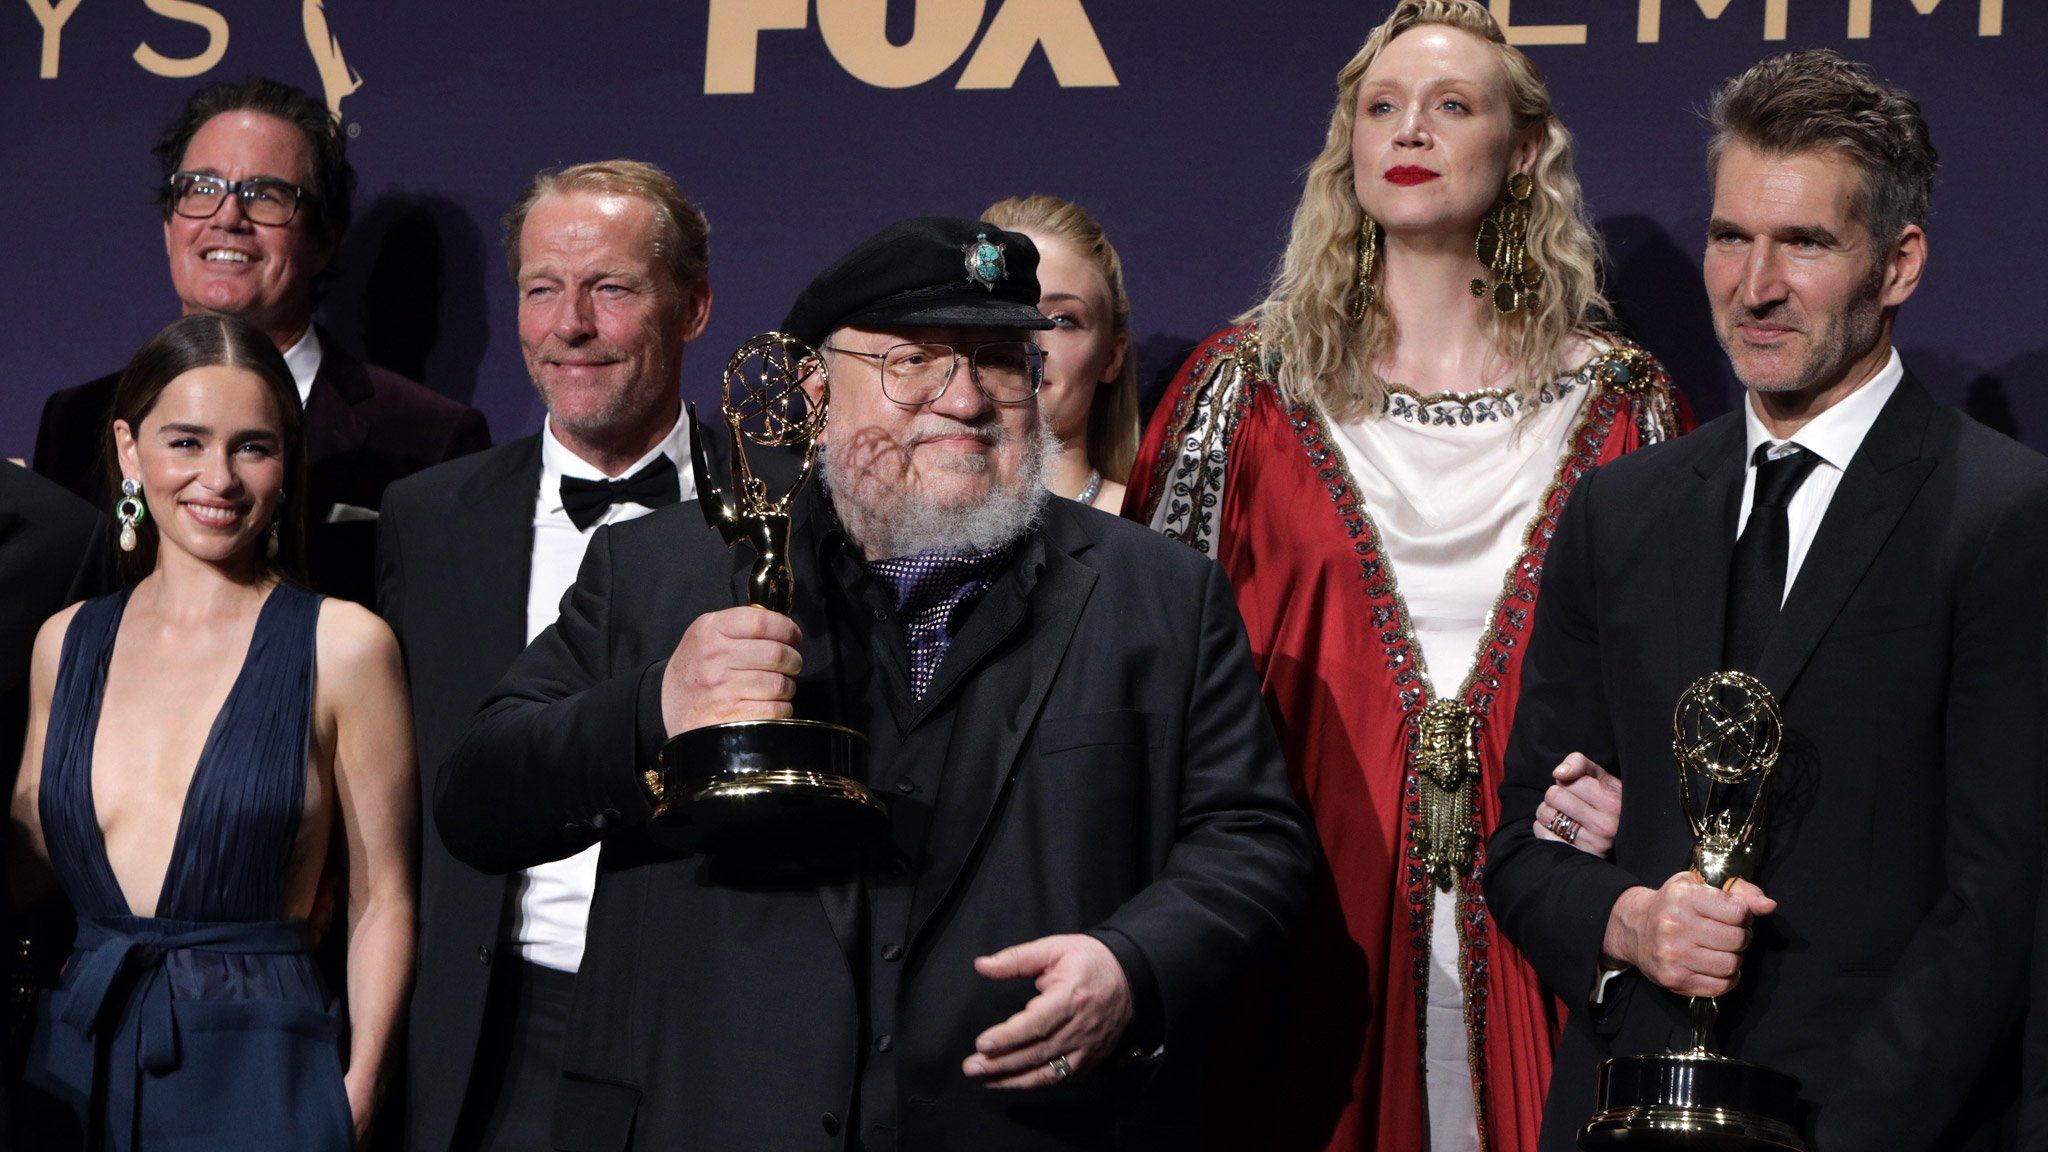 Game of Thrones creator George RR Martin with cast members at the Emmys